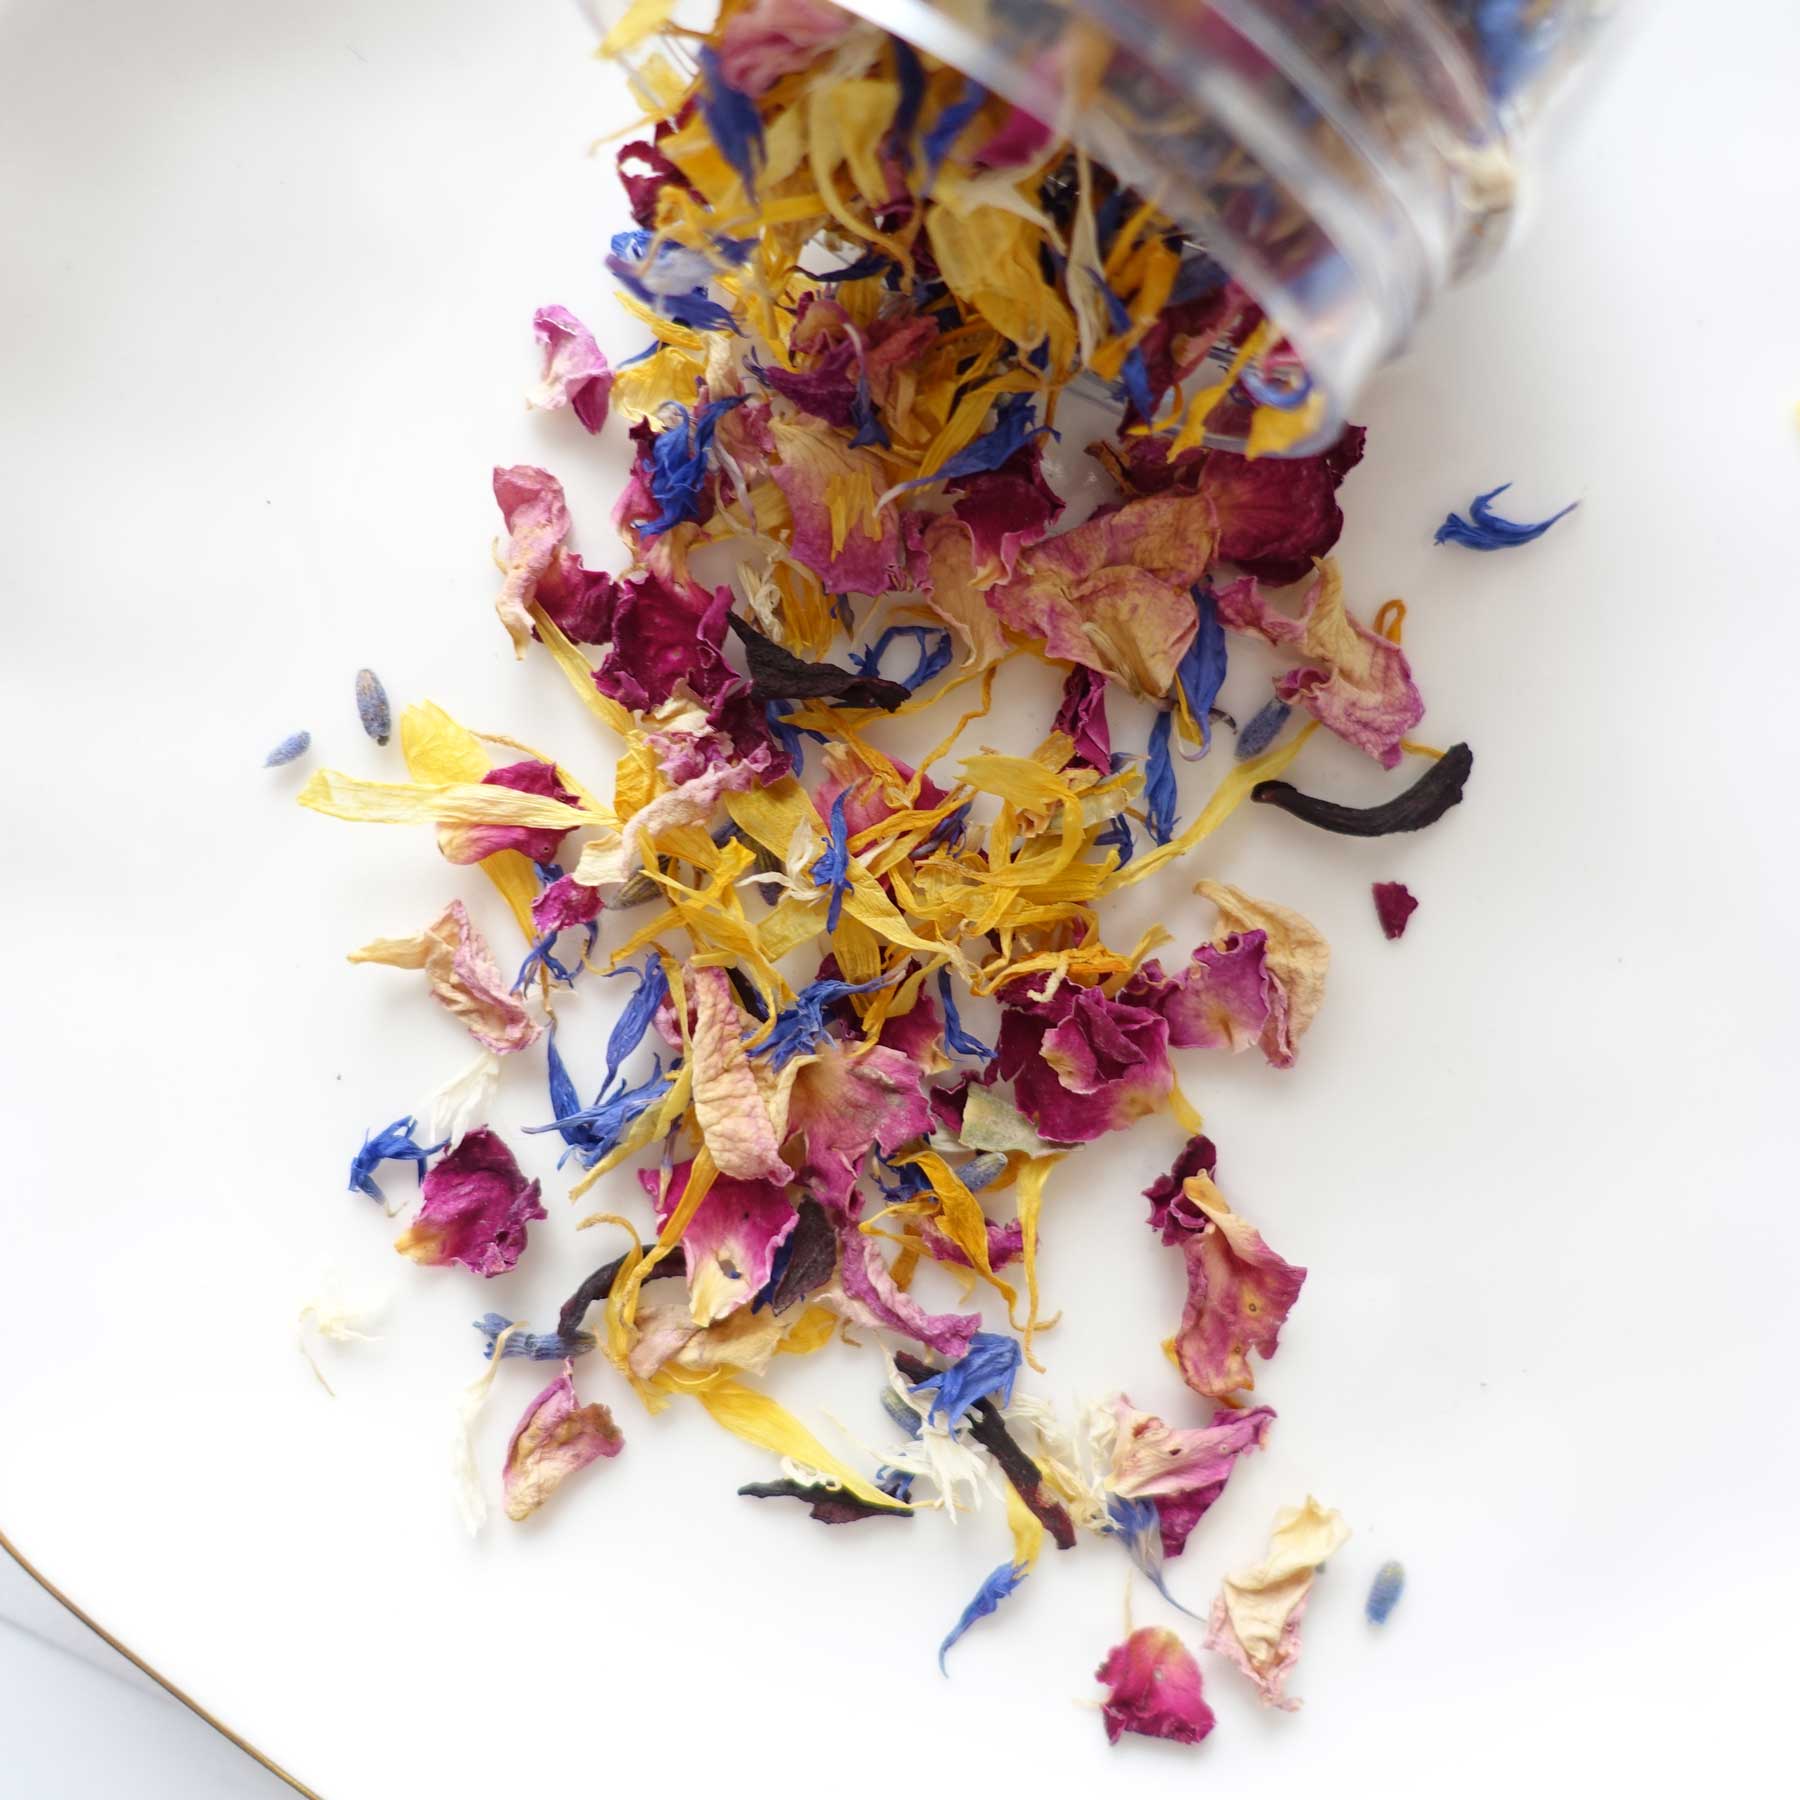 Dried flowers for wax sealing mix confetti